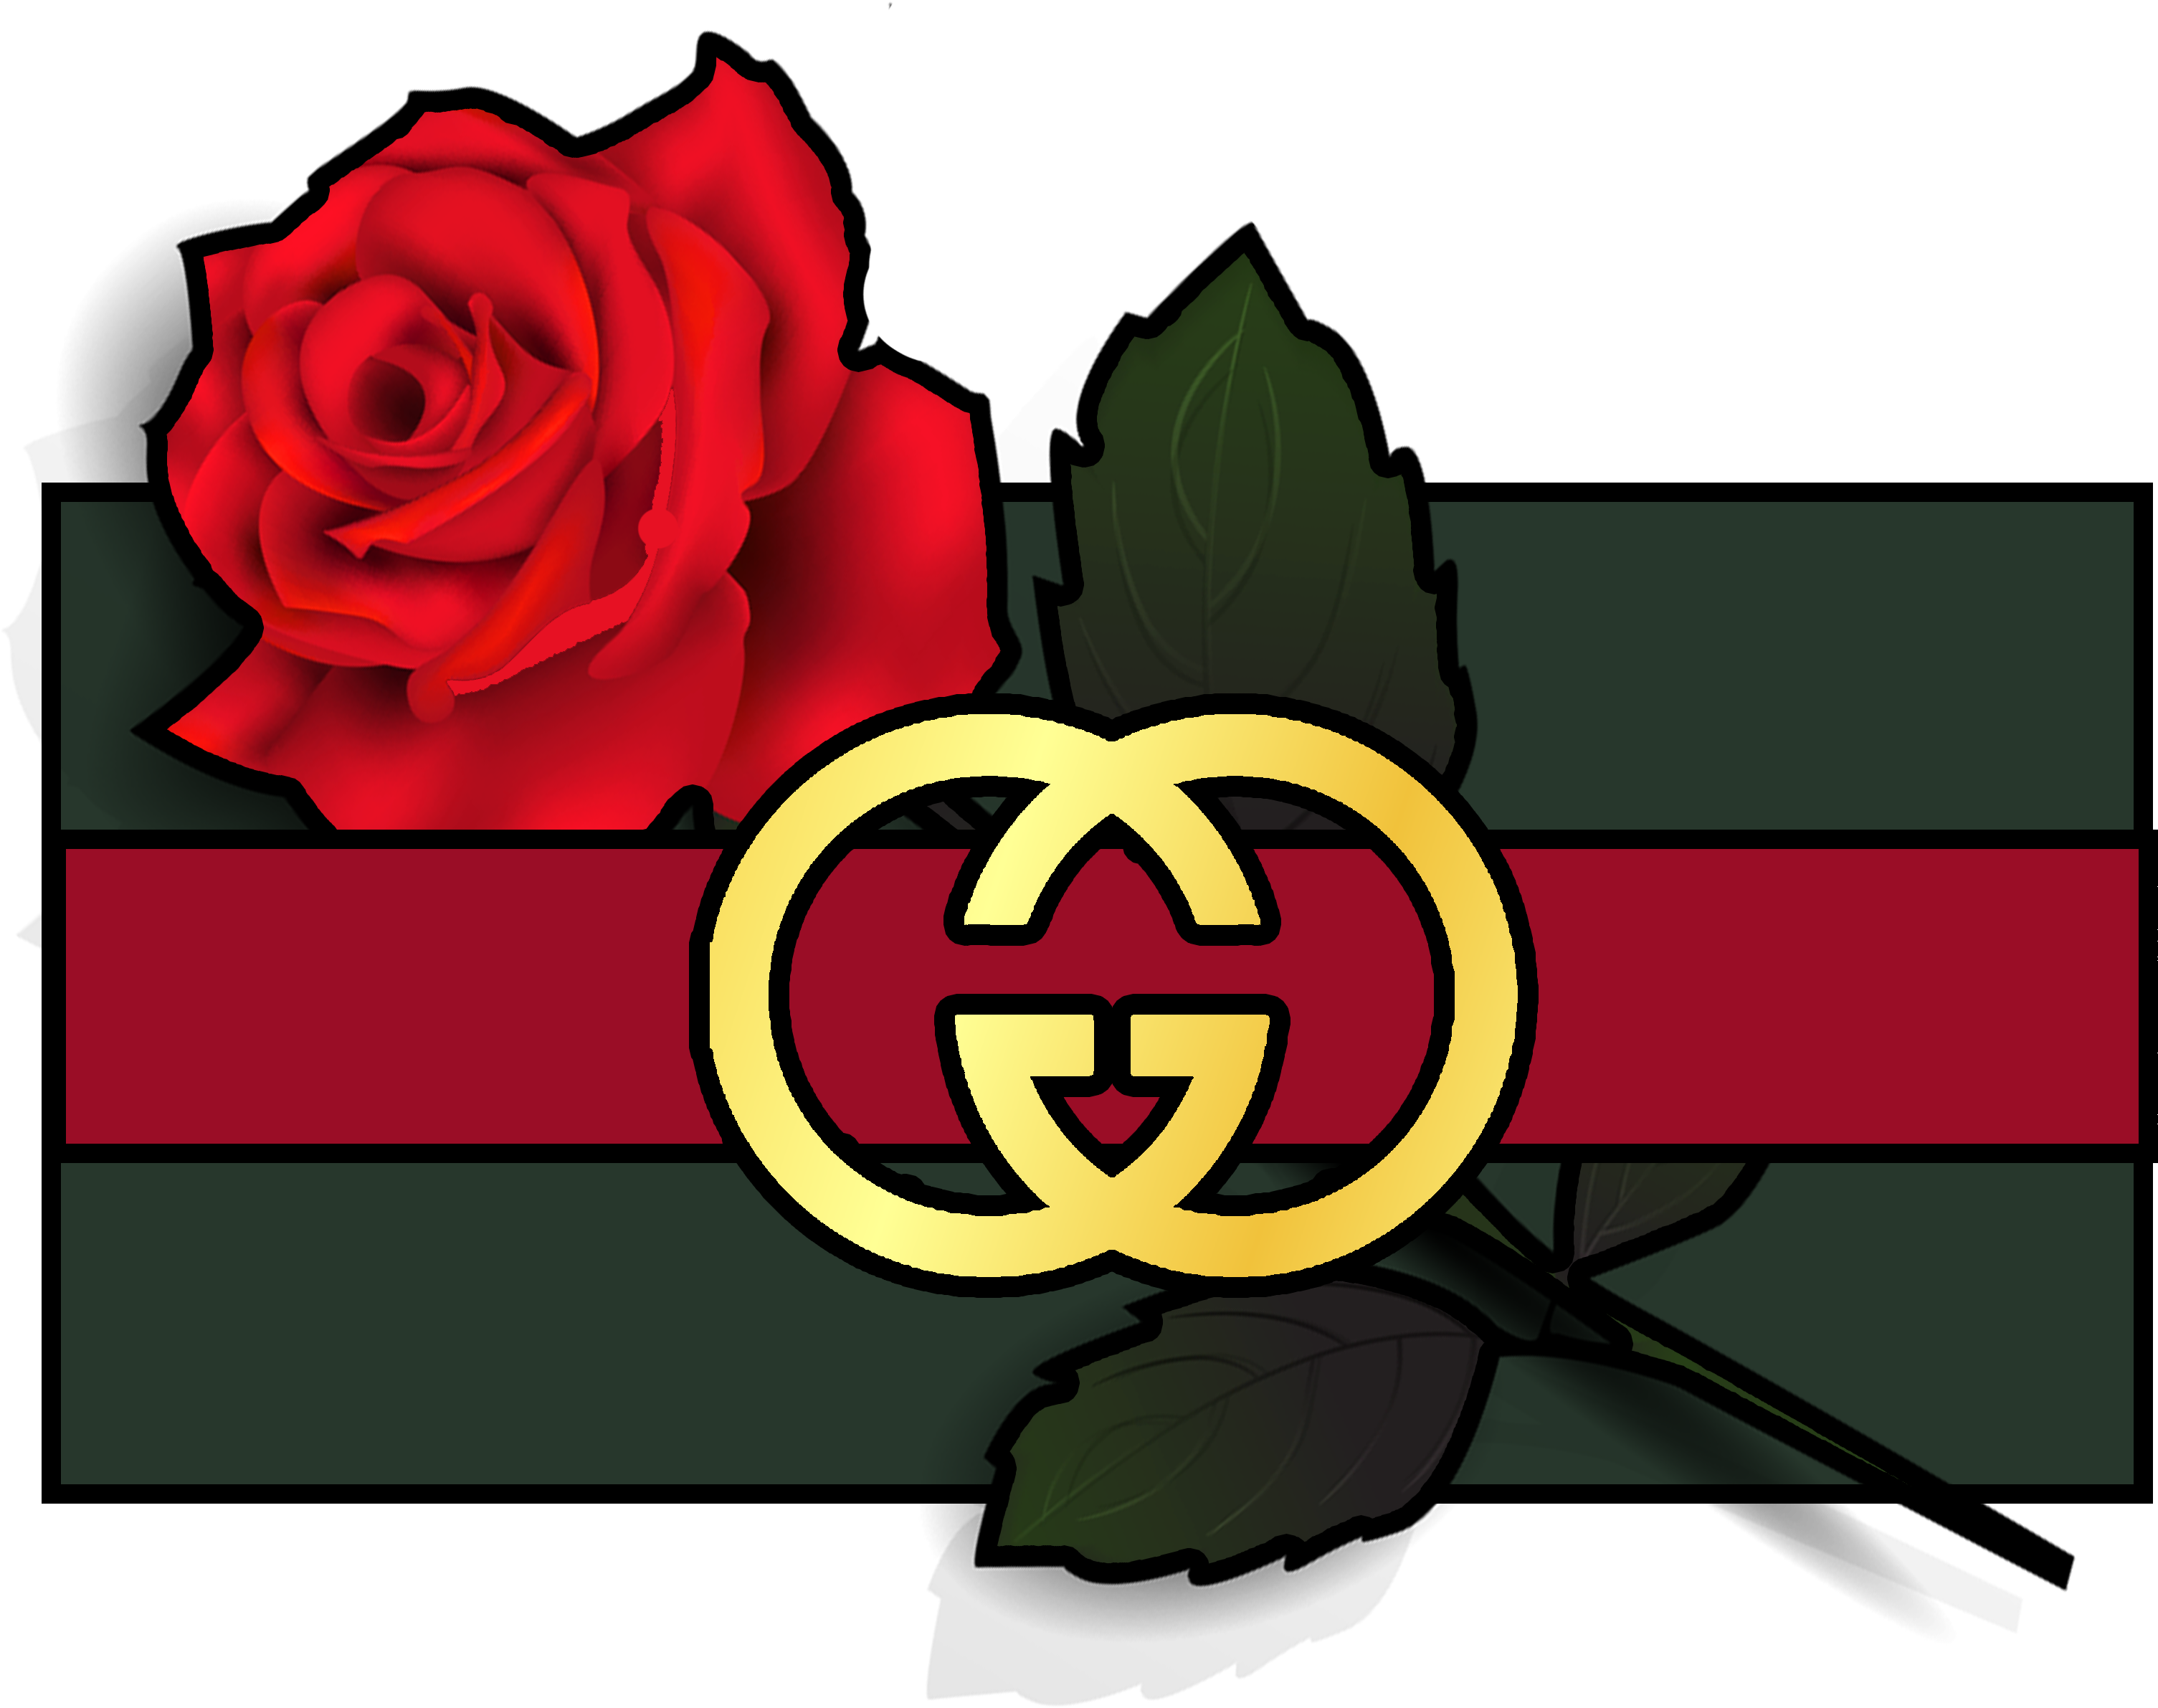 Download PNG image - Gucci PNG Image 